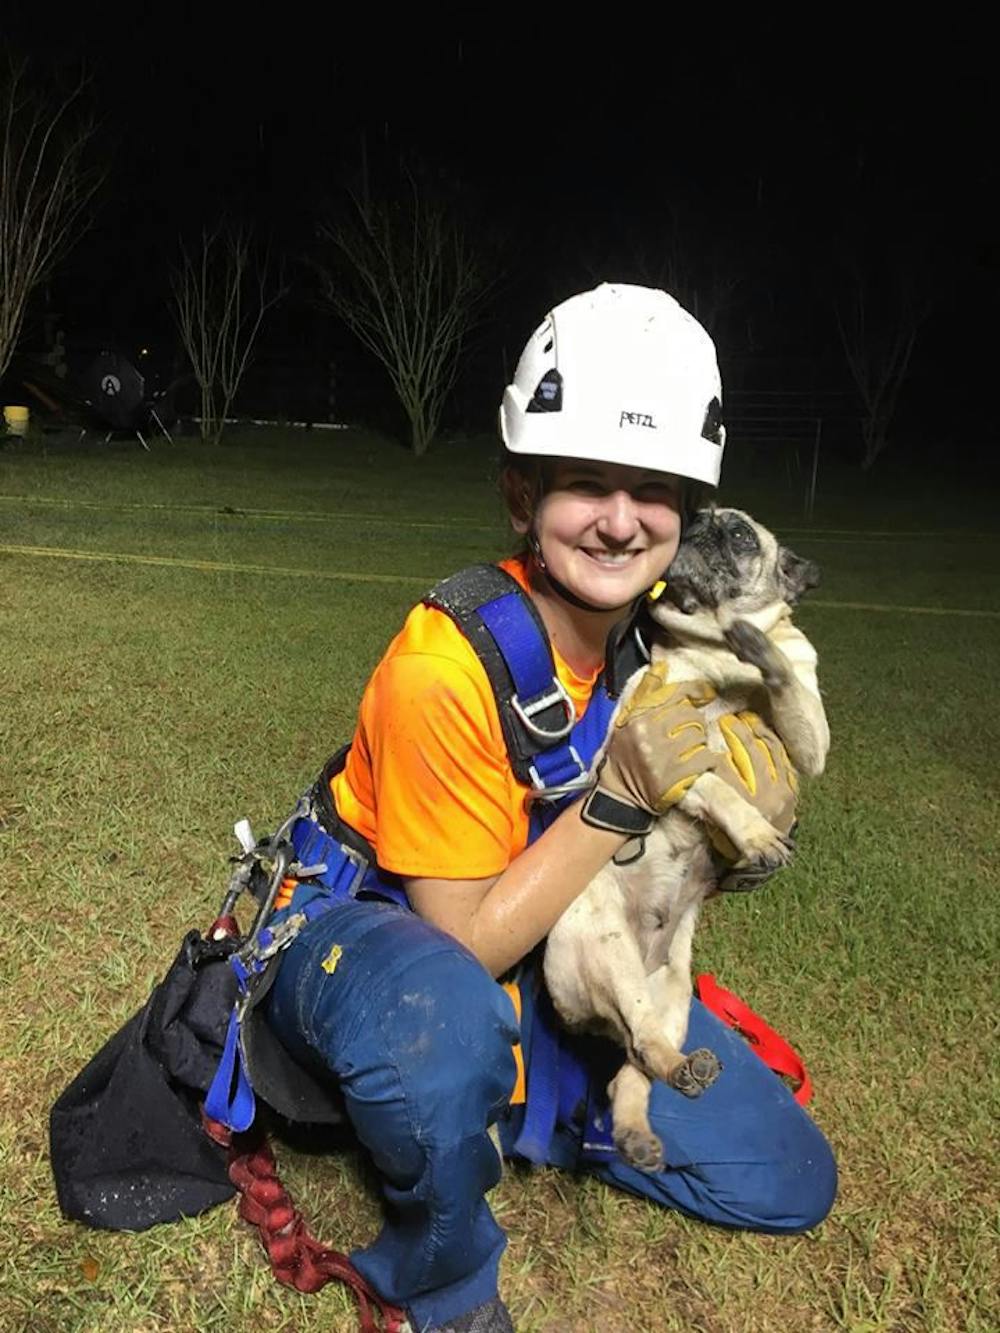 <p dir="ltr"><span>Jenny Groover, a team member with UF Veterinary Emergency Treatment Service, holds Cookie after rescuing the dog from a 30-foot sinkhole.</span></p>
<p><span>&nbsp;</span></p>